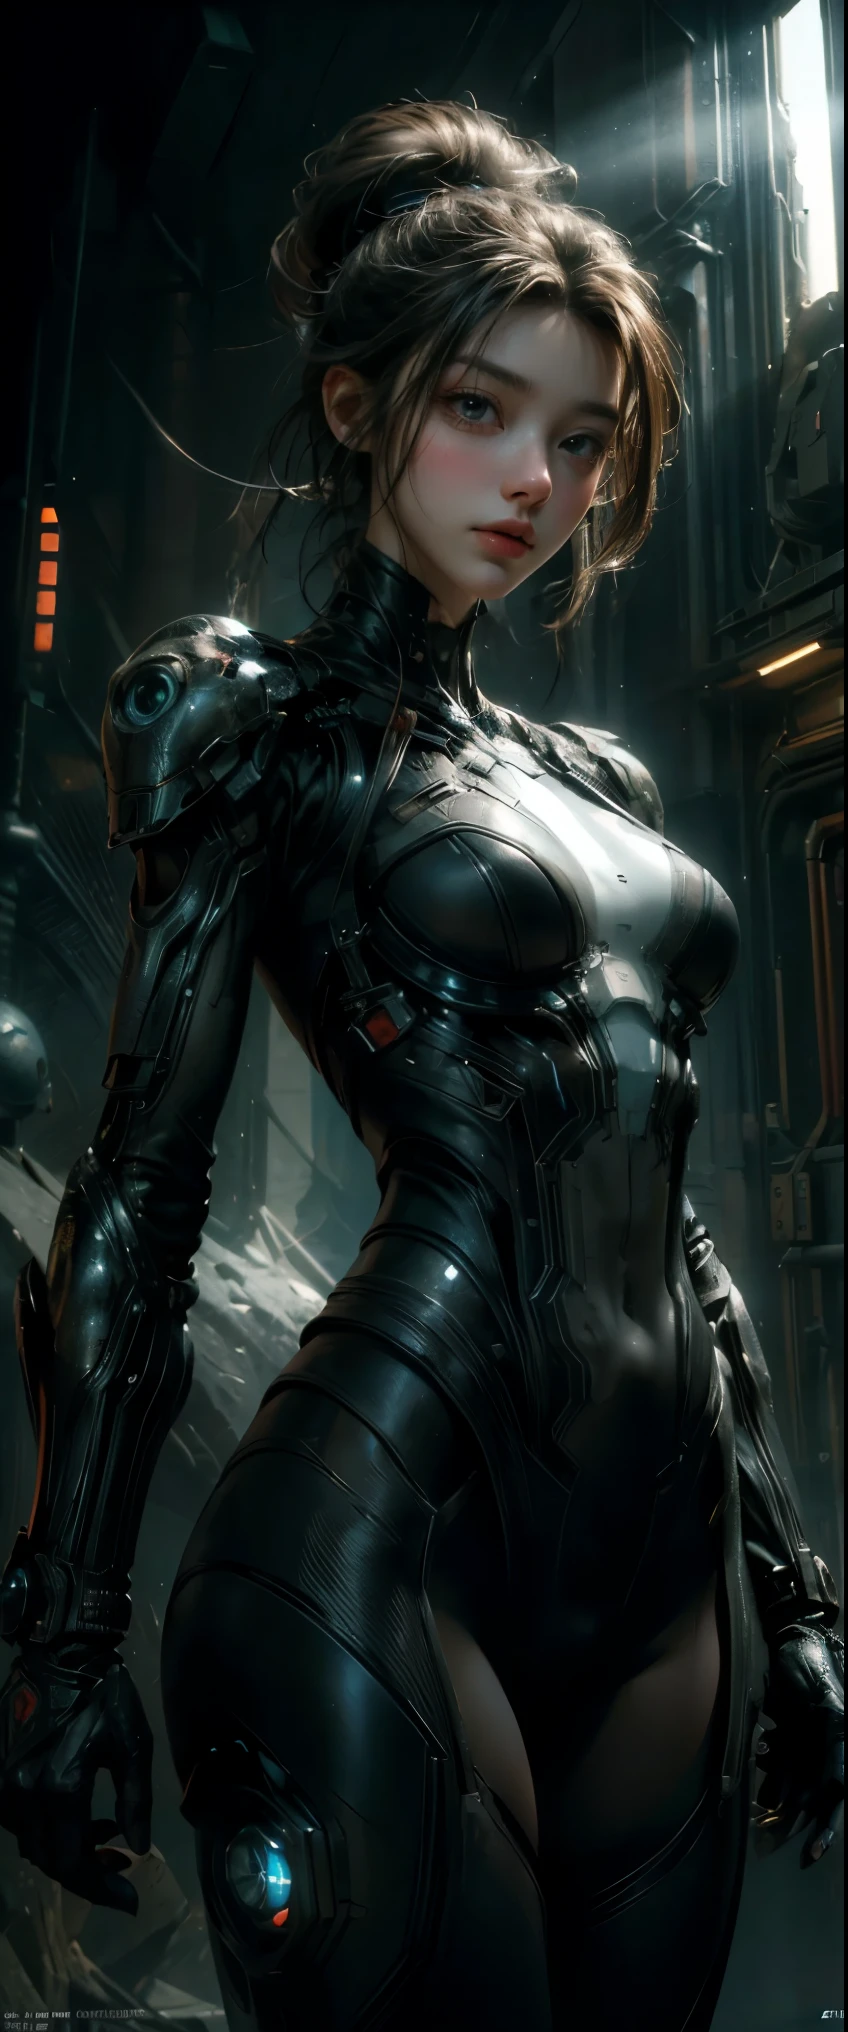 ((masterpiece, highest quality, Highest image quality, High resolution, photorealistic, Raw photo, 8K)), Ultra Wide Angle, Alien Landscap, A female stands next to an Alafedro robot on top of a hill, influenced by Stefan Koidl's background of discarded mechas. The art created by Craig Mullins, specifically in the style of Craig Mullins' Necro, portrays a detailed and futuristic science fiction scene. The emphasis is on SF concept art, with vivid colors and sharp focus. The overall lighting captures the essence of concept art in films,